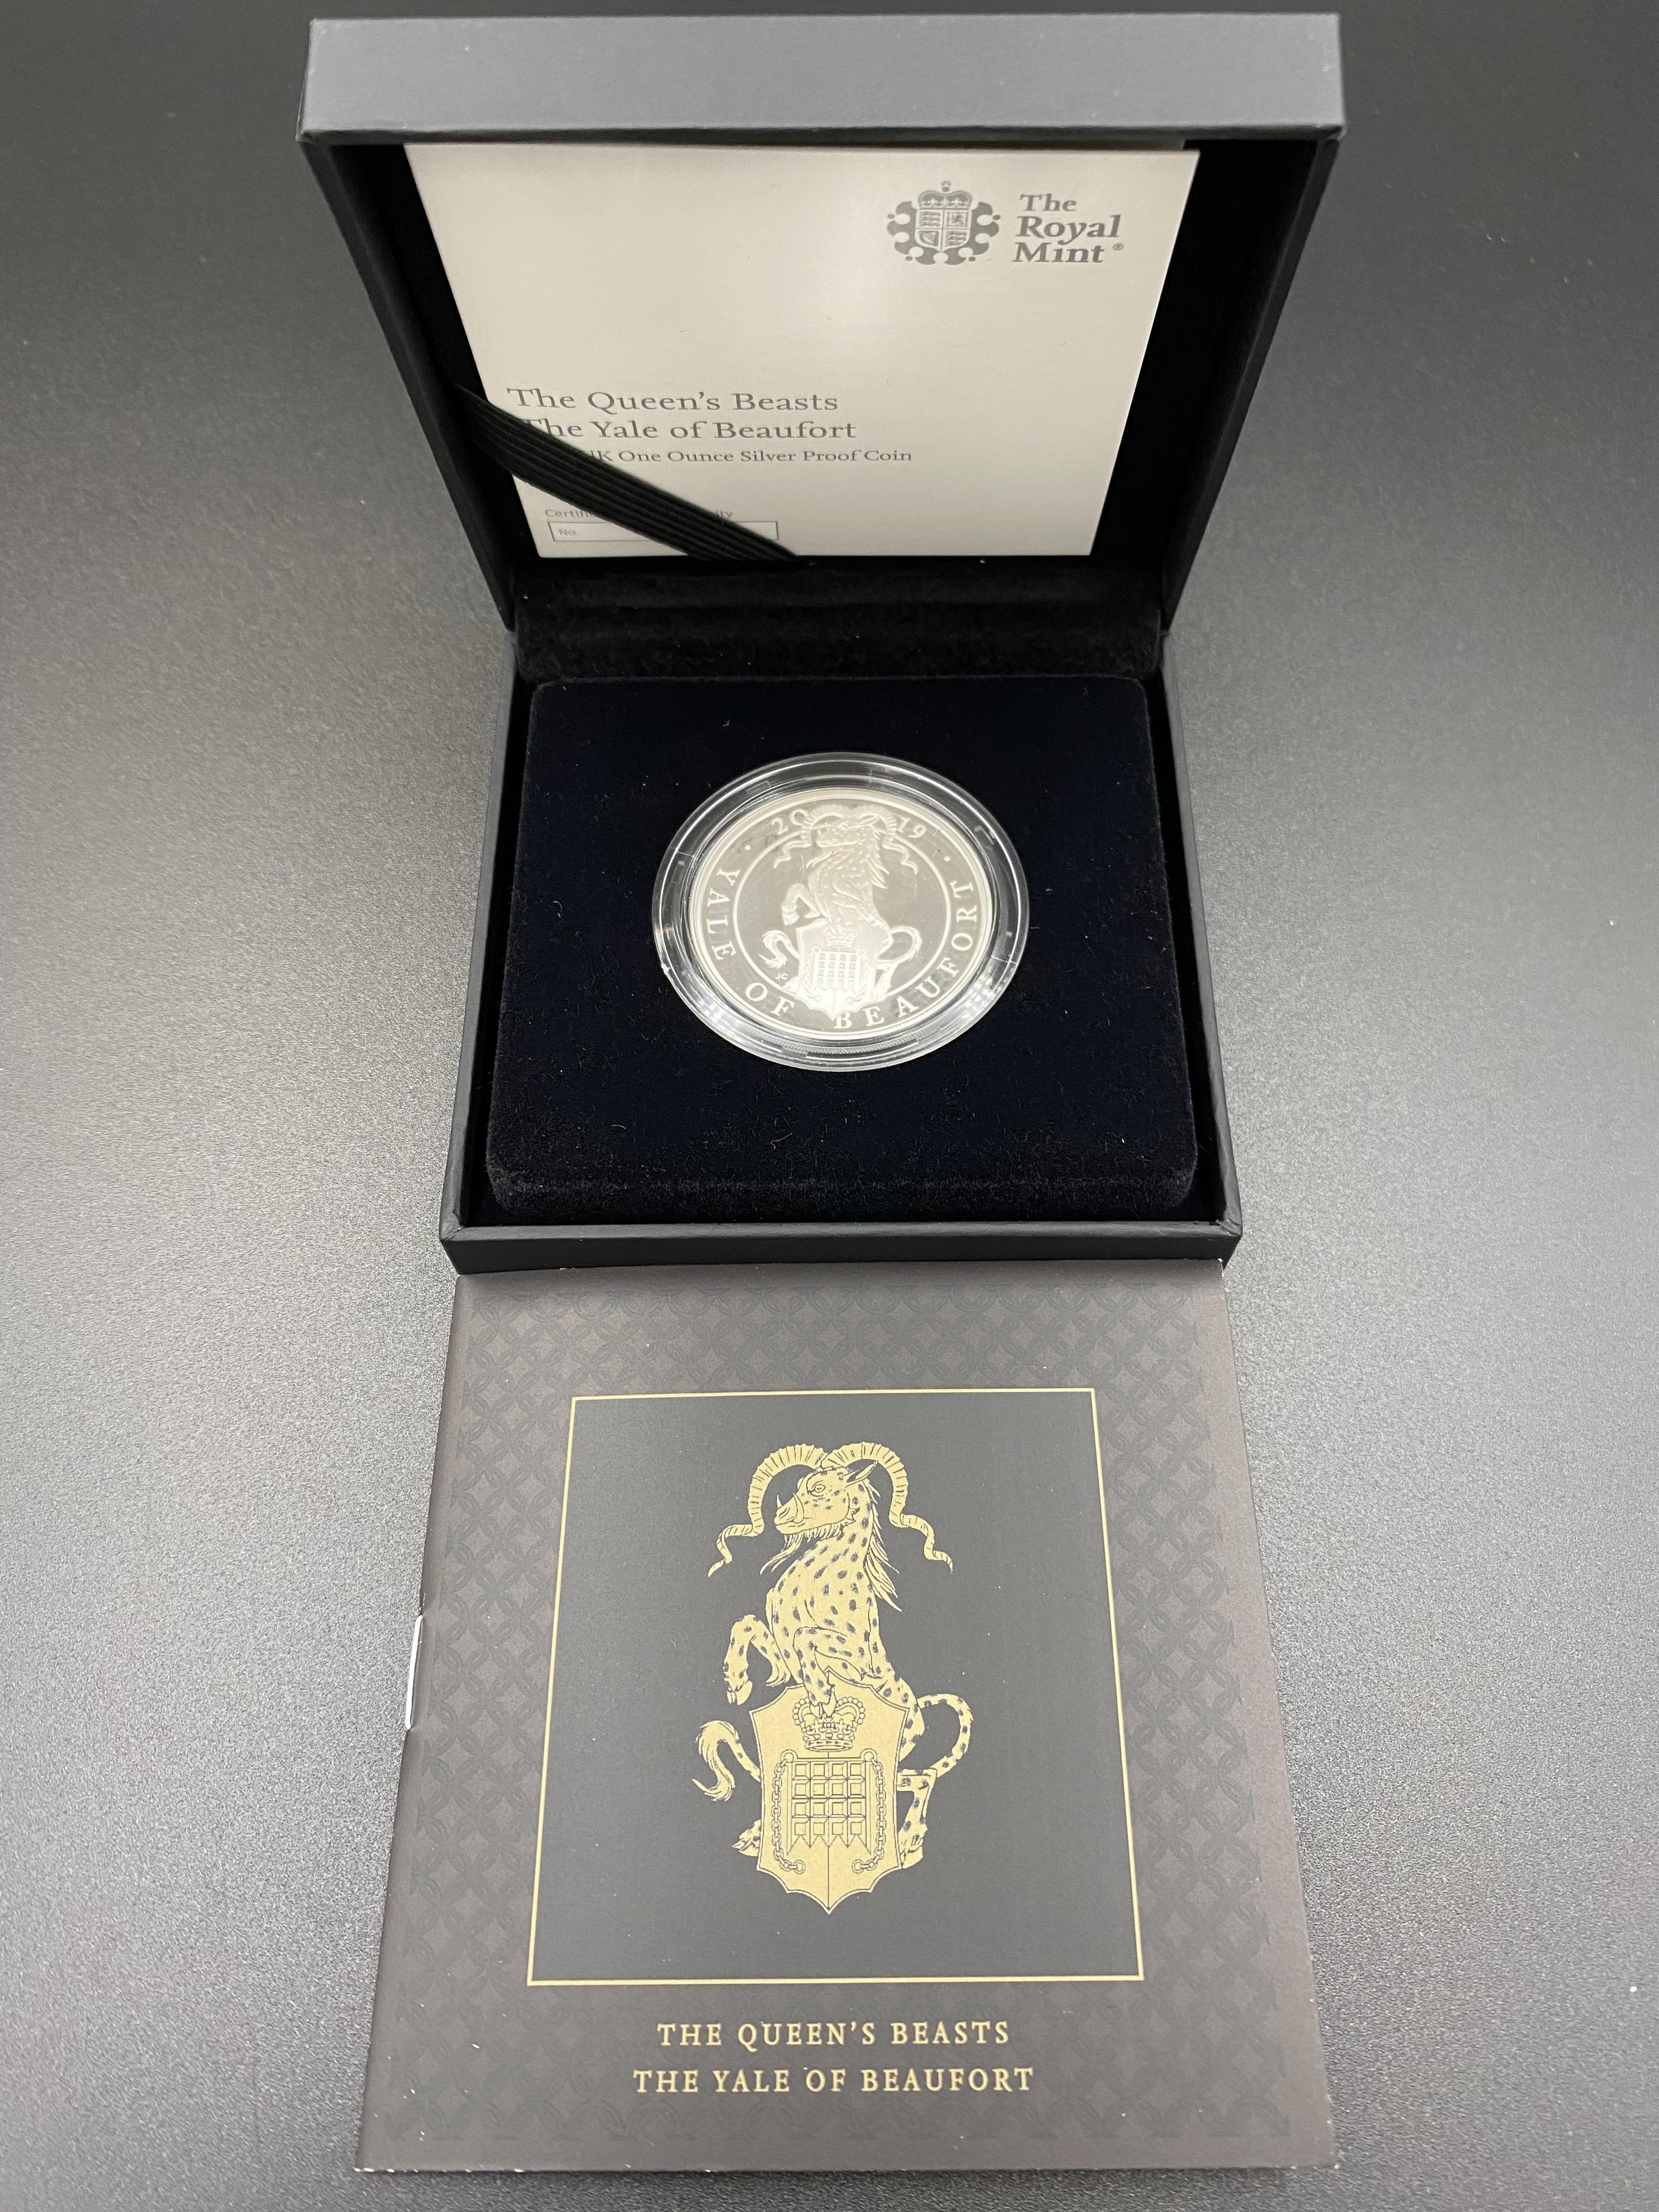 Royal Mint Queen's Beasts Yale of Beaufort 2019 one ounce silver proof coin - Image 2 of 4